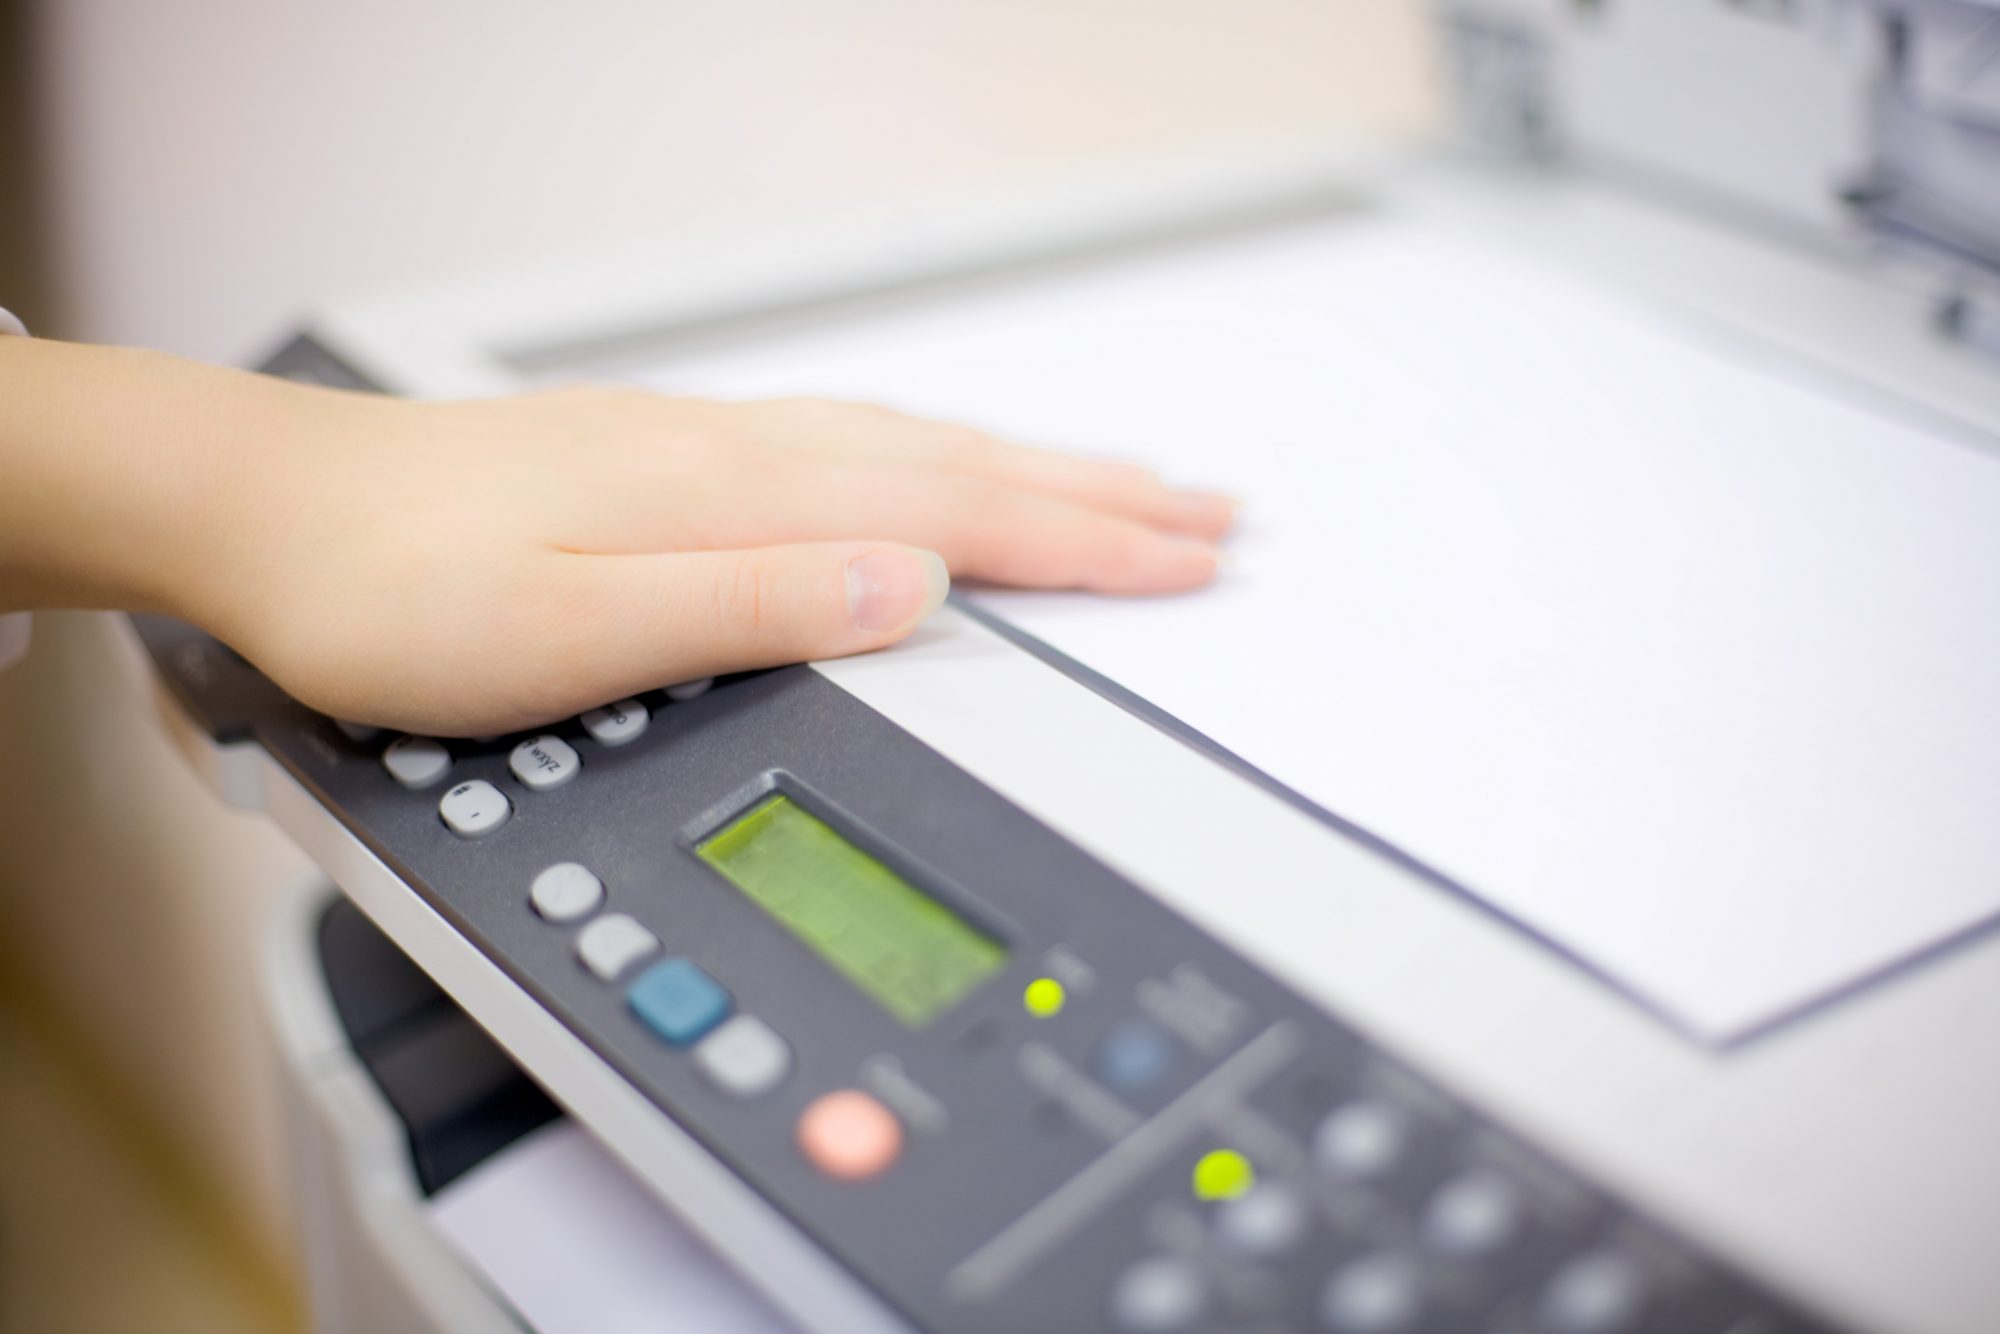 You Need To Know The Terms and Agreement Before Leasing A Copier